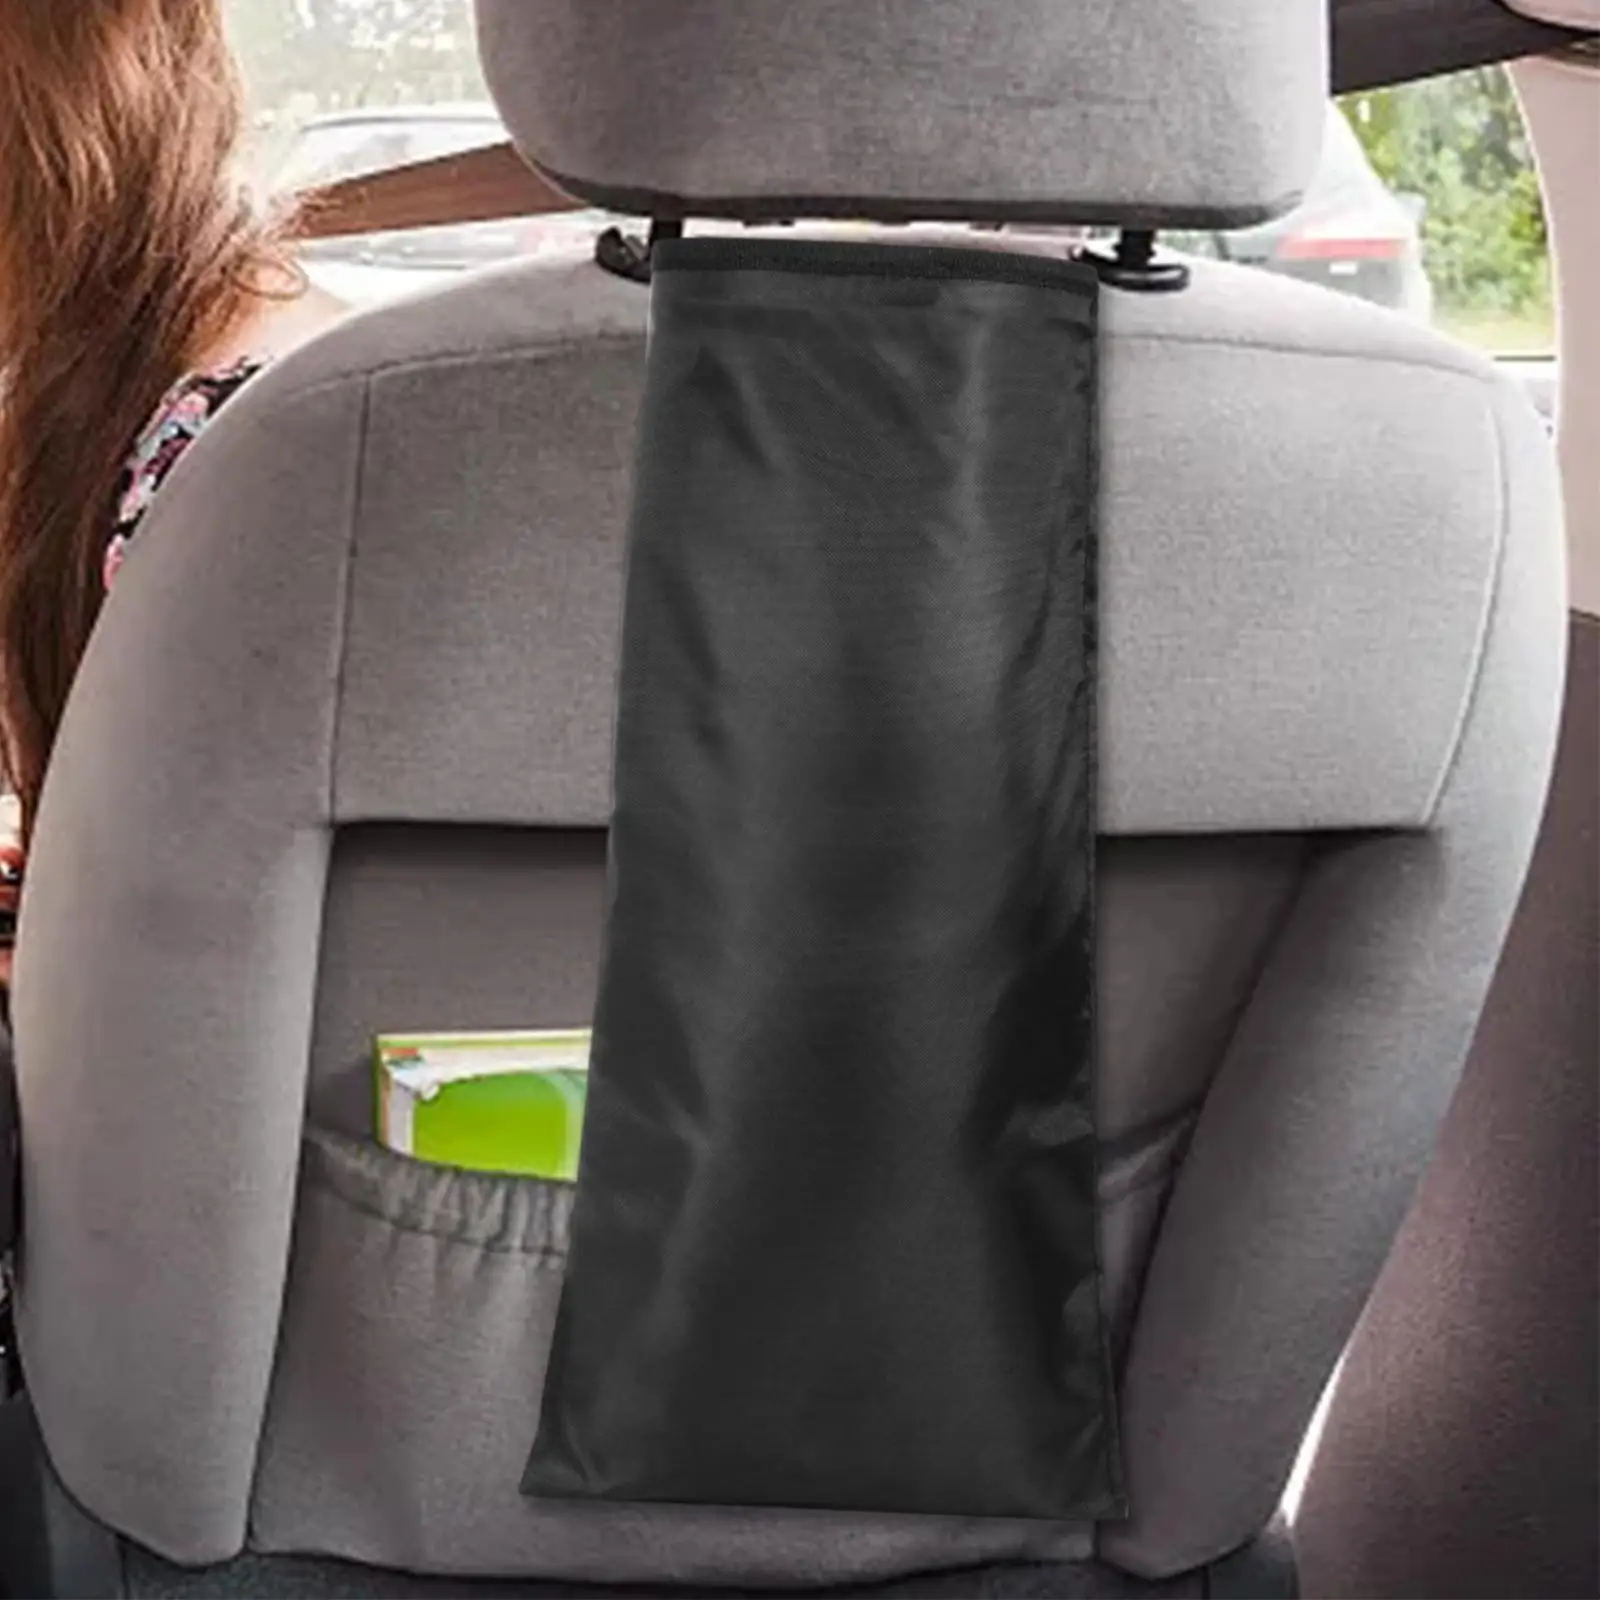 Car Trash Bag Car Accessories Premium Hang from Headrest Vehicle Garbage Can